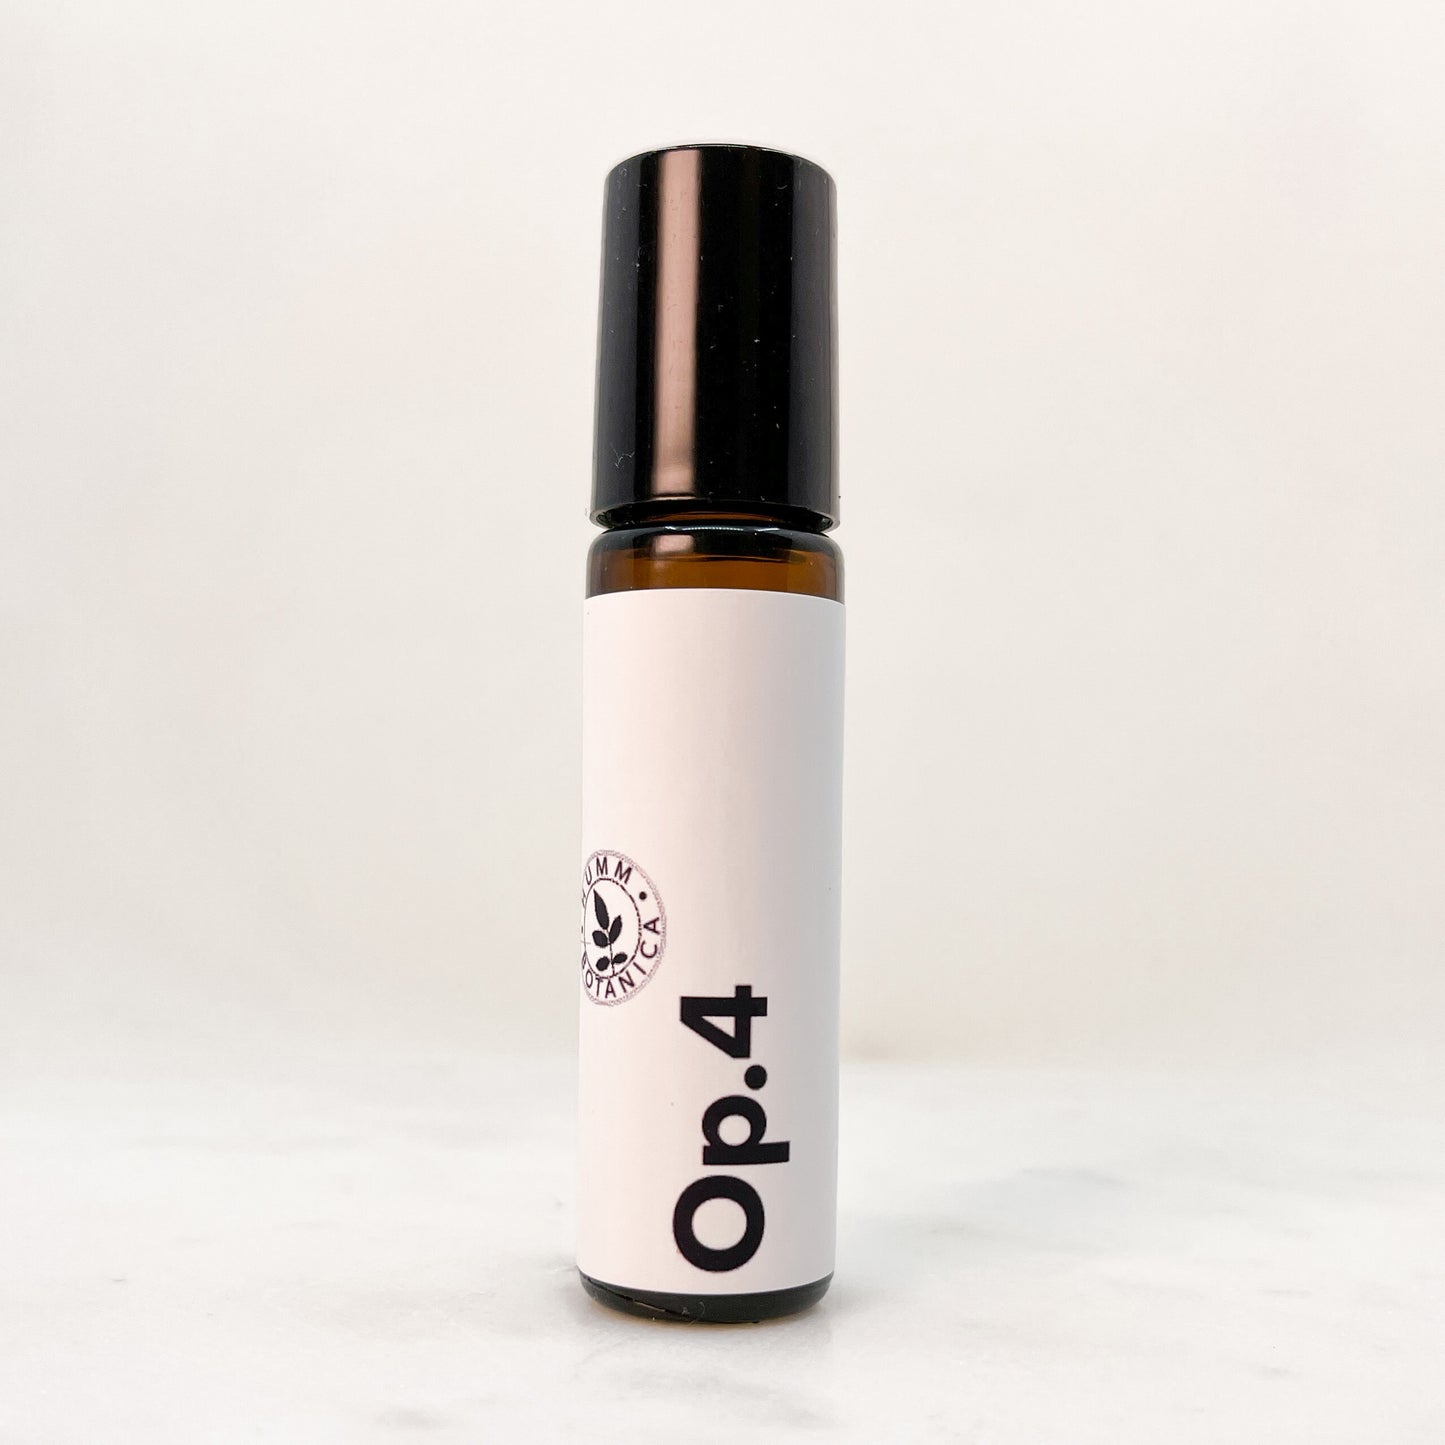 Aroma perfume oil roller. Beautiful scent of orange blossom, orange, frankincense and sandalwood. Non toxic 100% natural